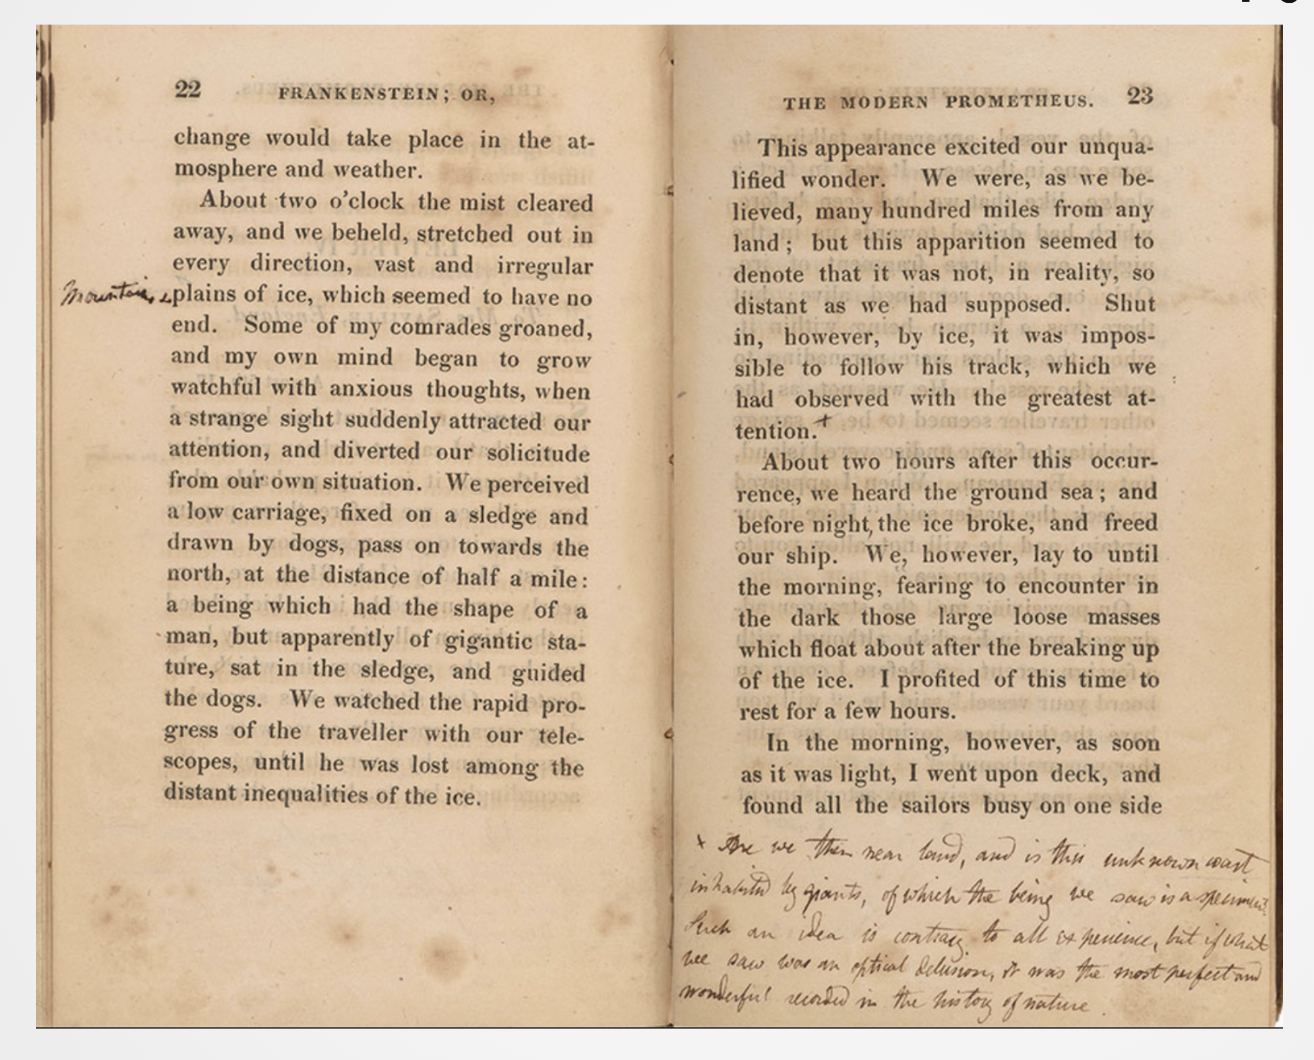 image from the Thomas copy showing Mary Shelley’s margin comments on copy of her novel published in 1818.